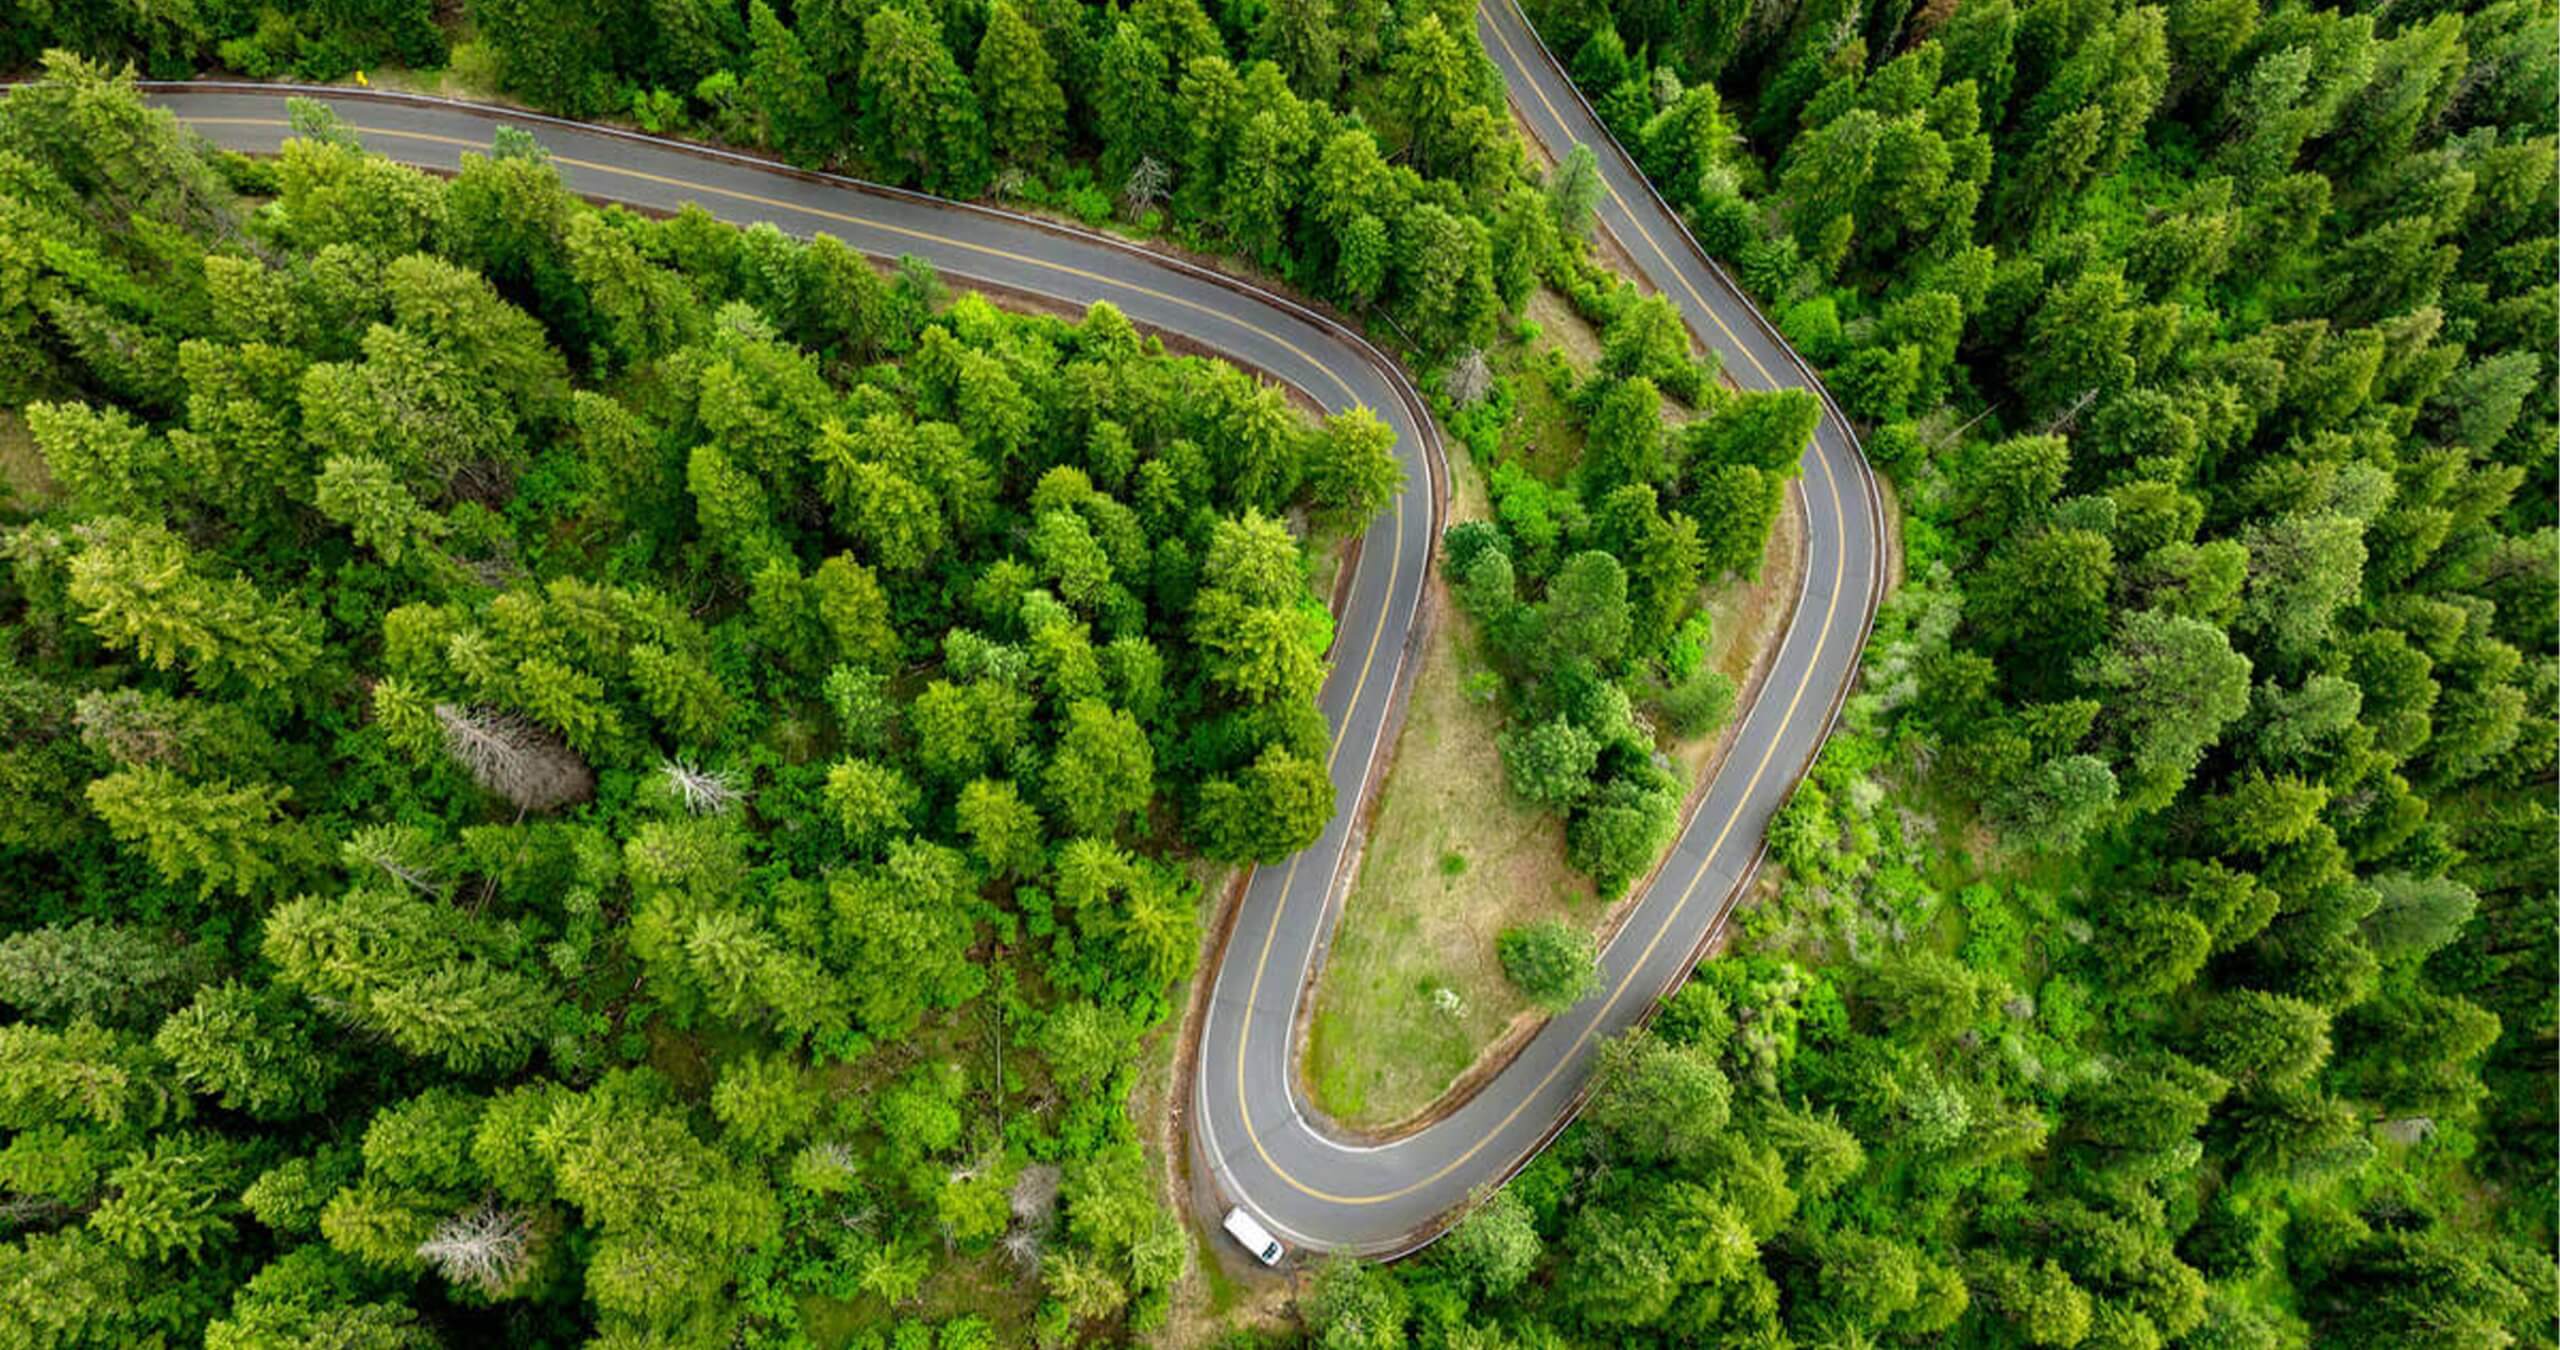 A winding road in a forest of trees from above.